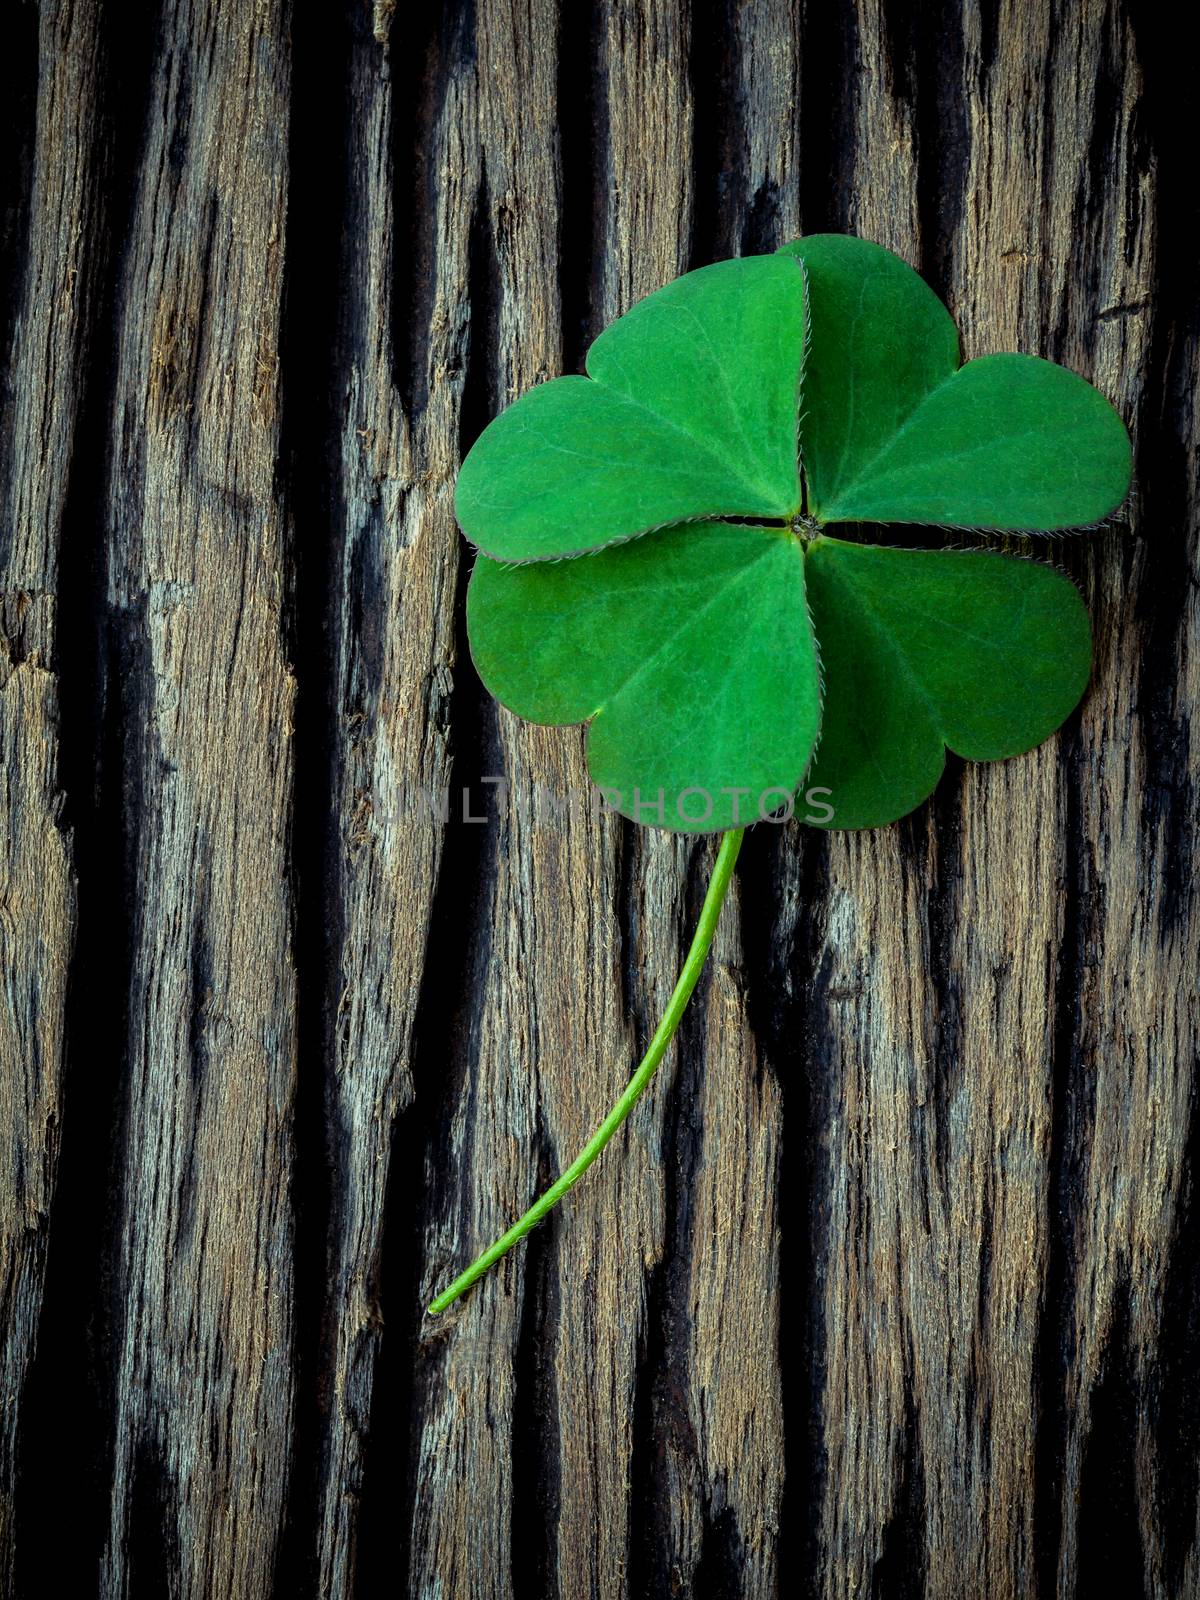 Clover leaves on shabby wooden background. The symbolic of Four Leaf Clover the first is for faith, the second is for hope, the third is for love, and the fourth is for luck.